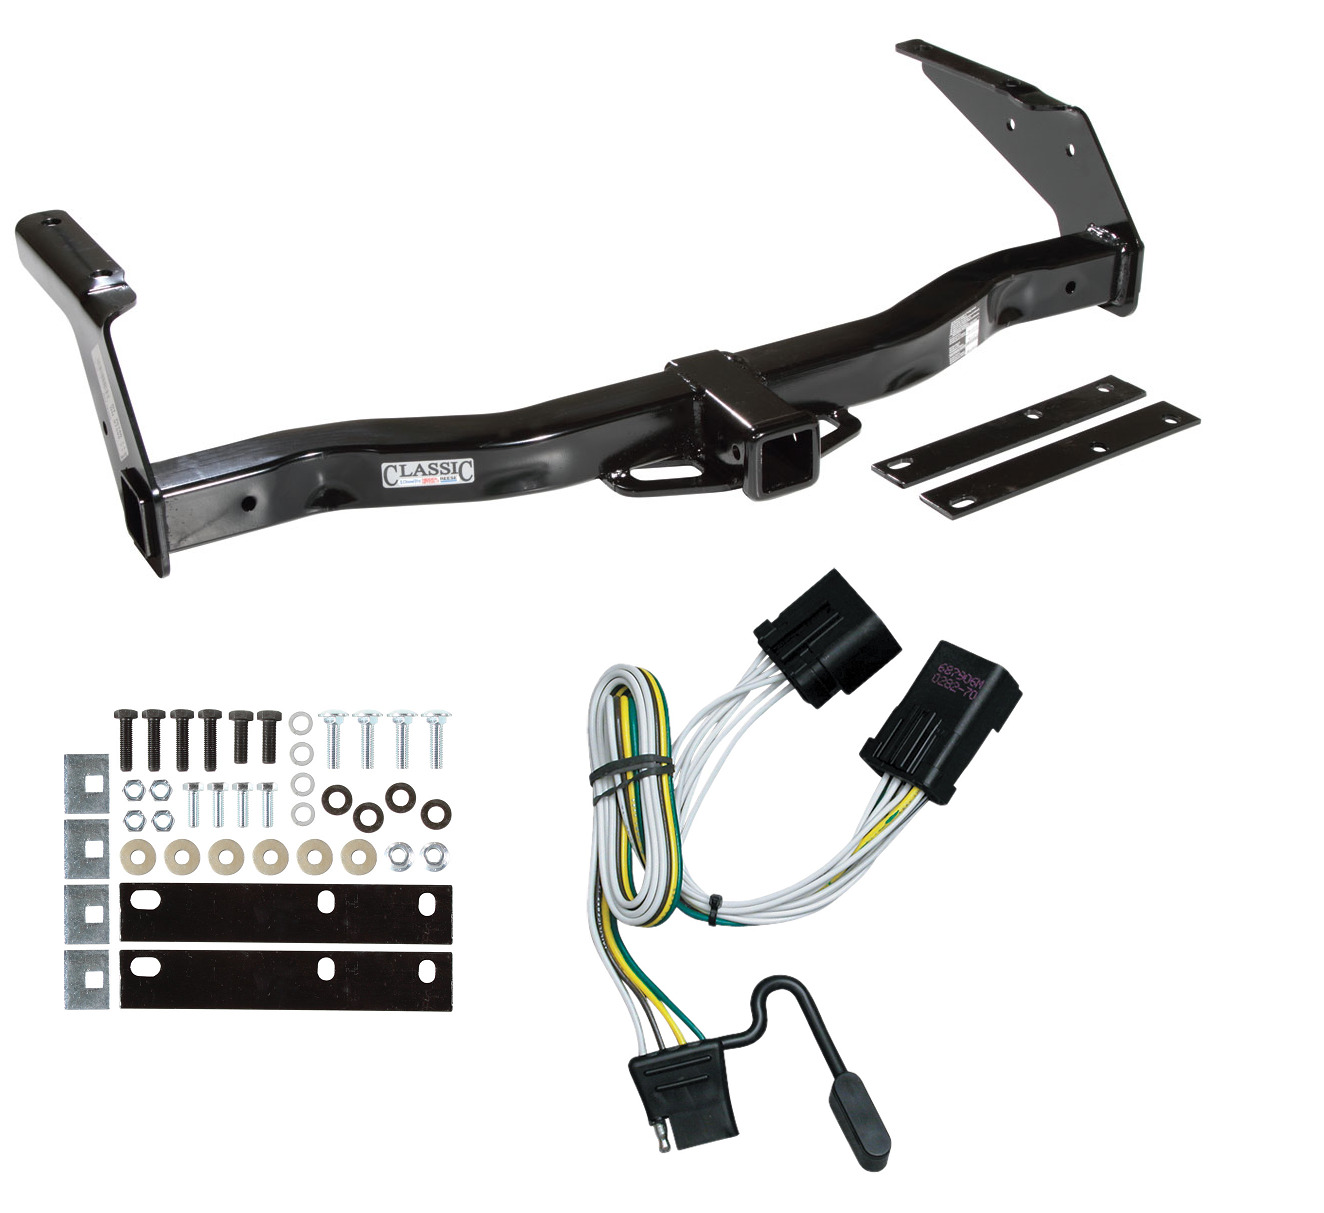 Trailer Tow Hitch For 01-03 Dodge Van Ram 1500 2500 3500 w/ Wiring Harness Kit